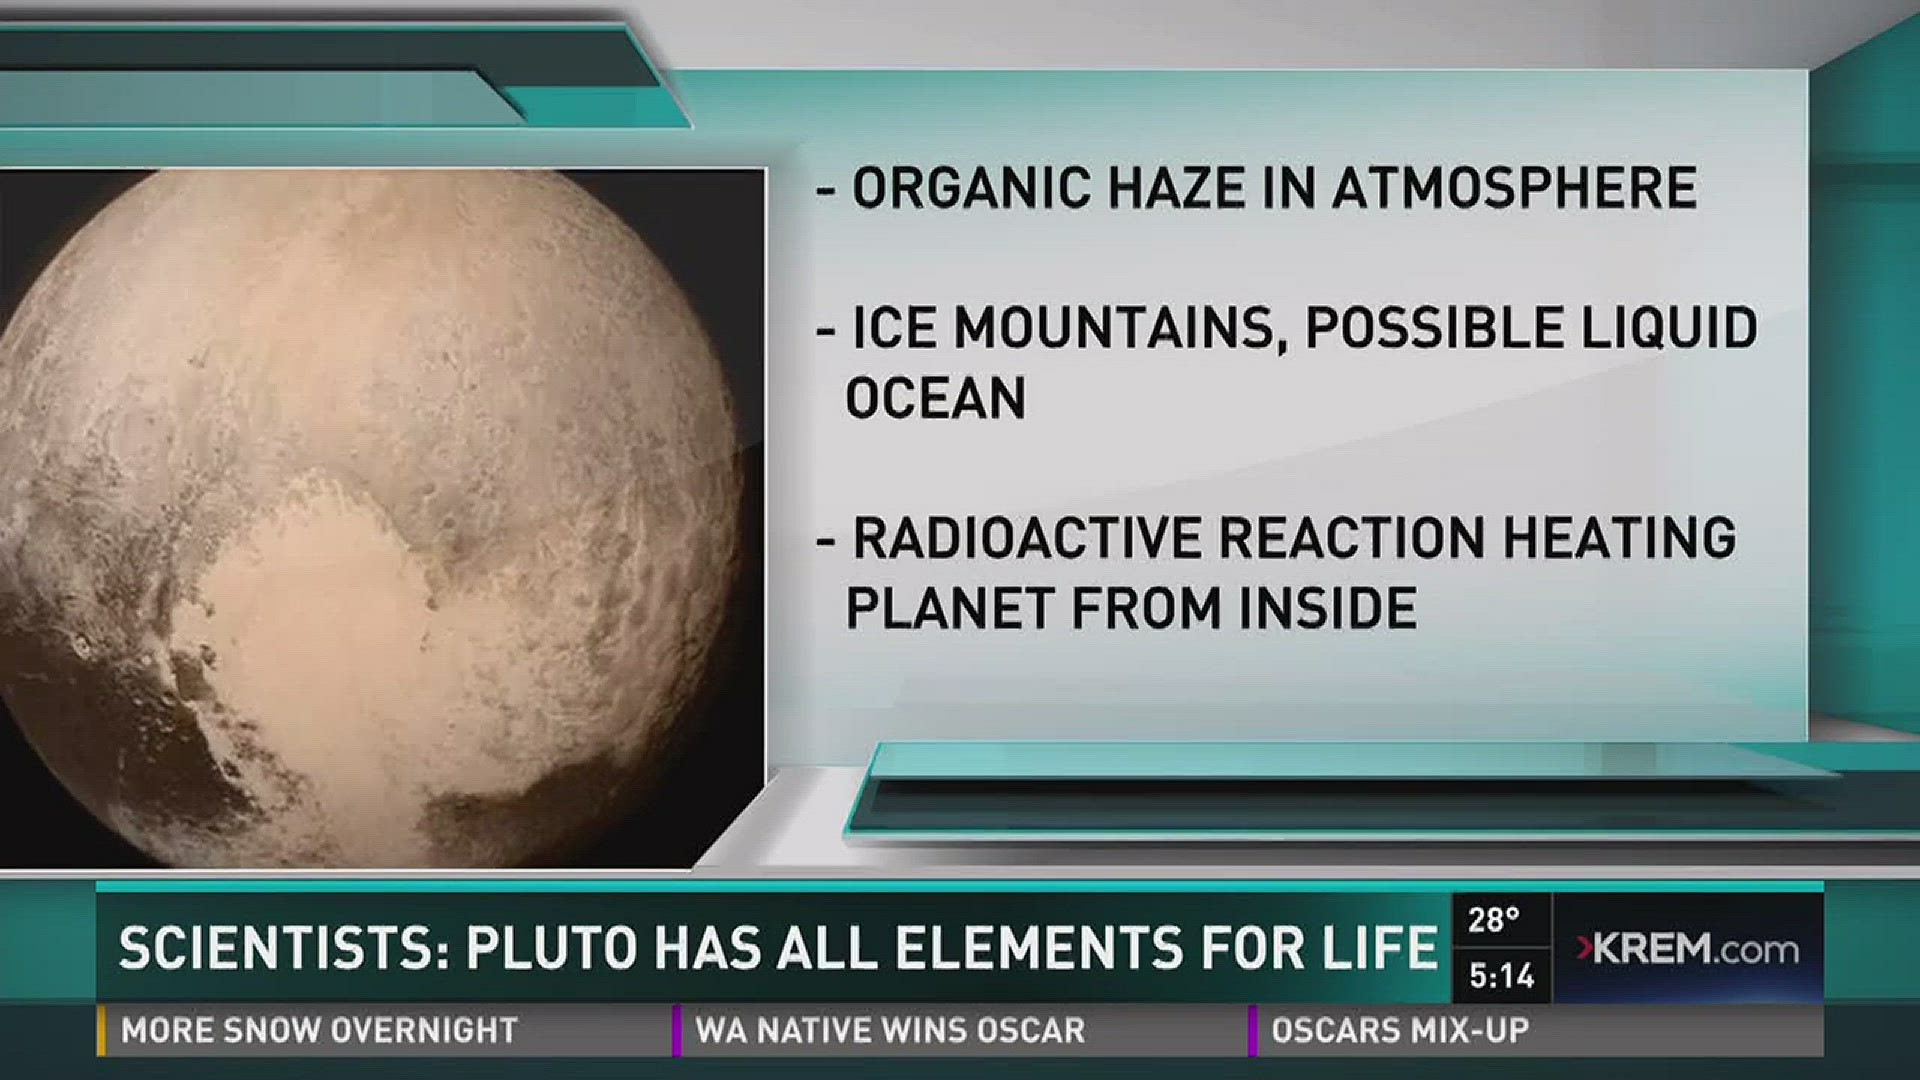 One planetary specialist who has studied Pluto for years, says he sees everything needed for life -- organics, raw material and energy.